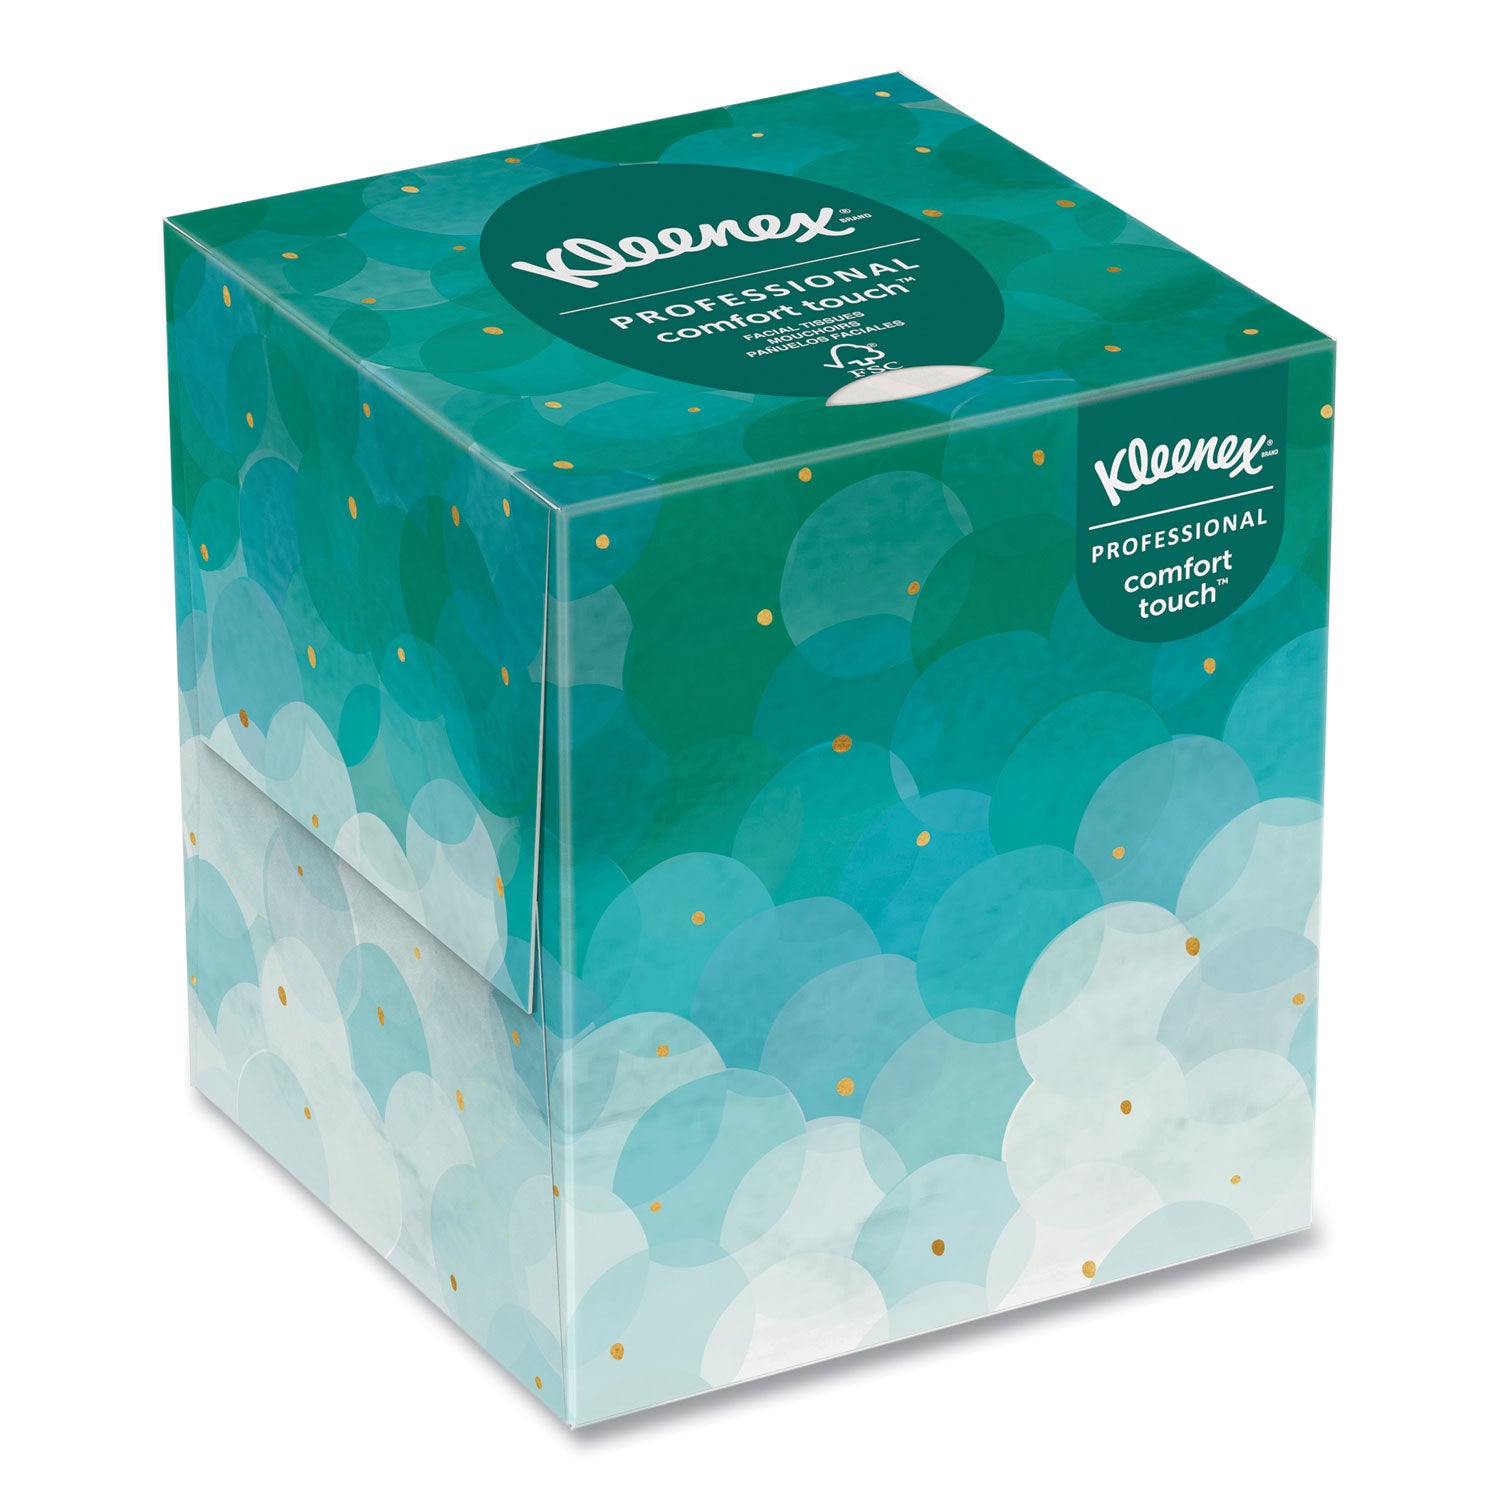 Boutique White Facial Tissue for Business, Pop-Up Box, 2-Ply, 95 Sheets/Box, 36 Boxes/Carton - 